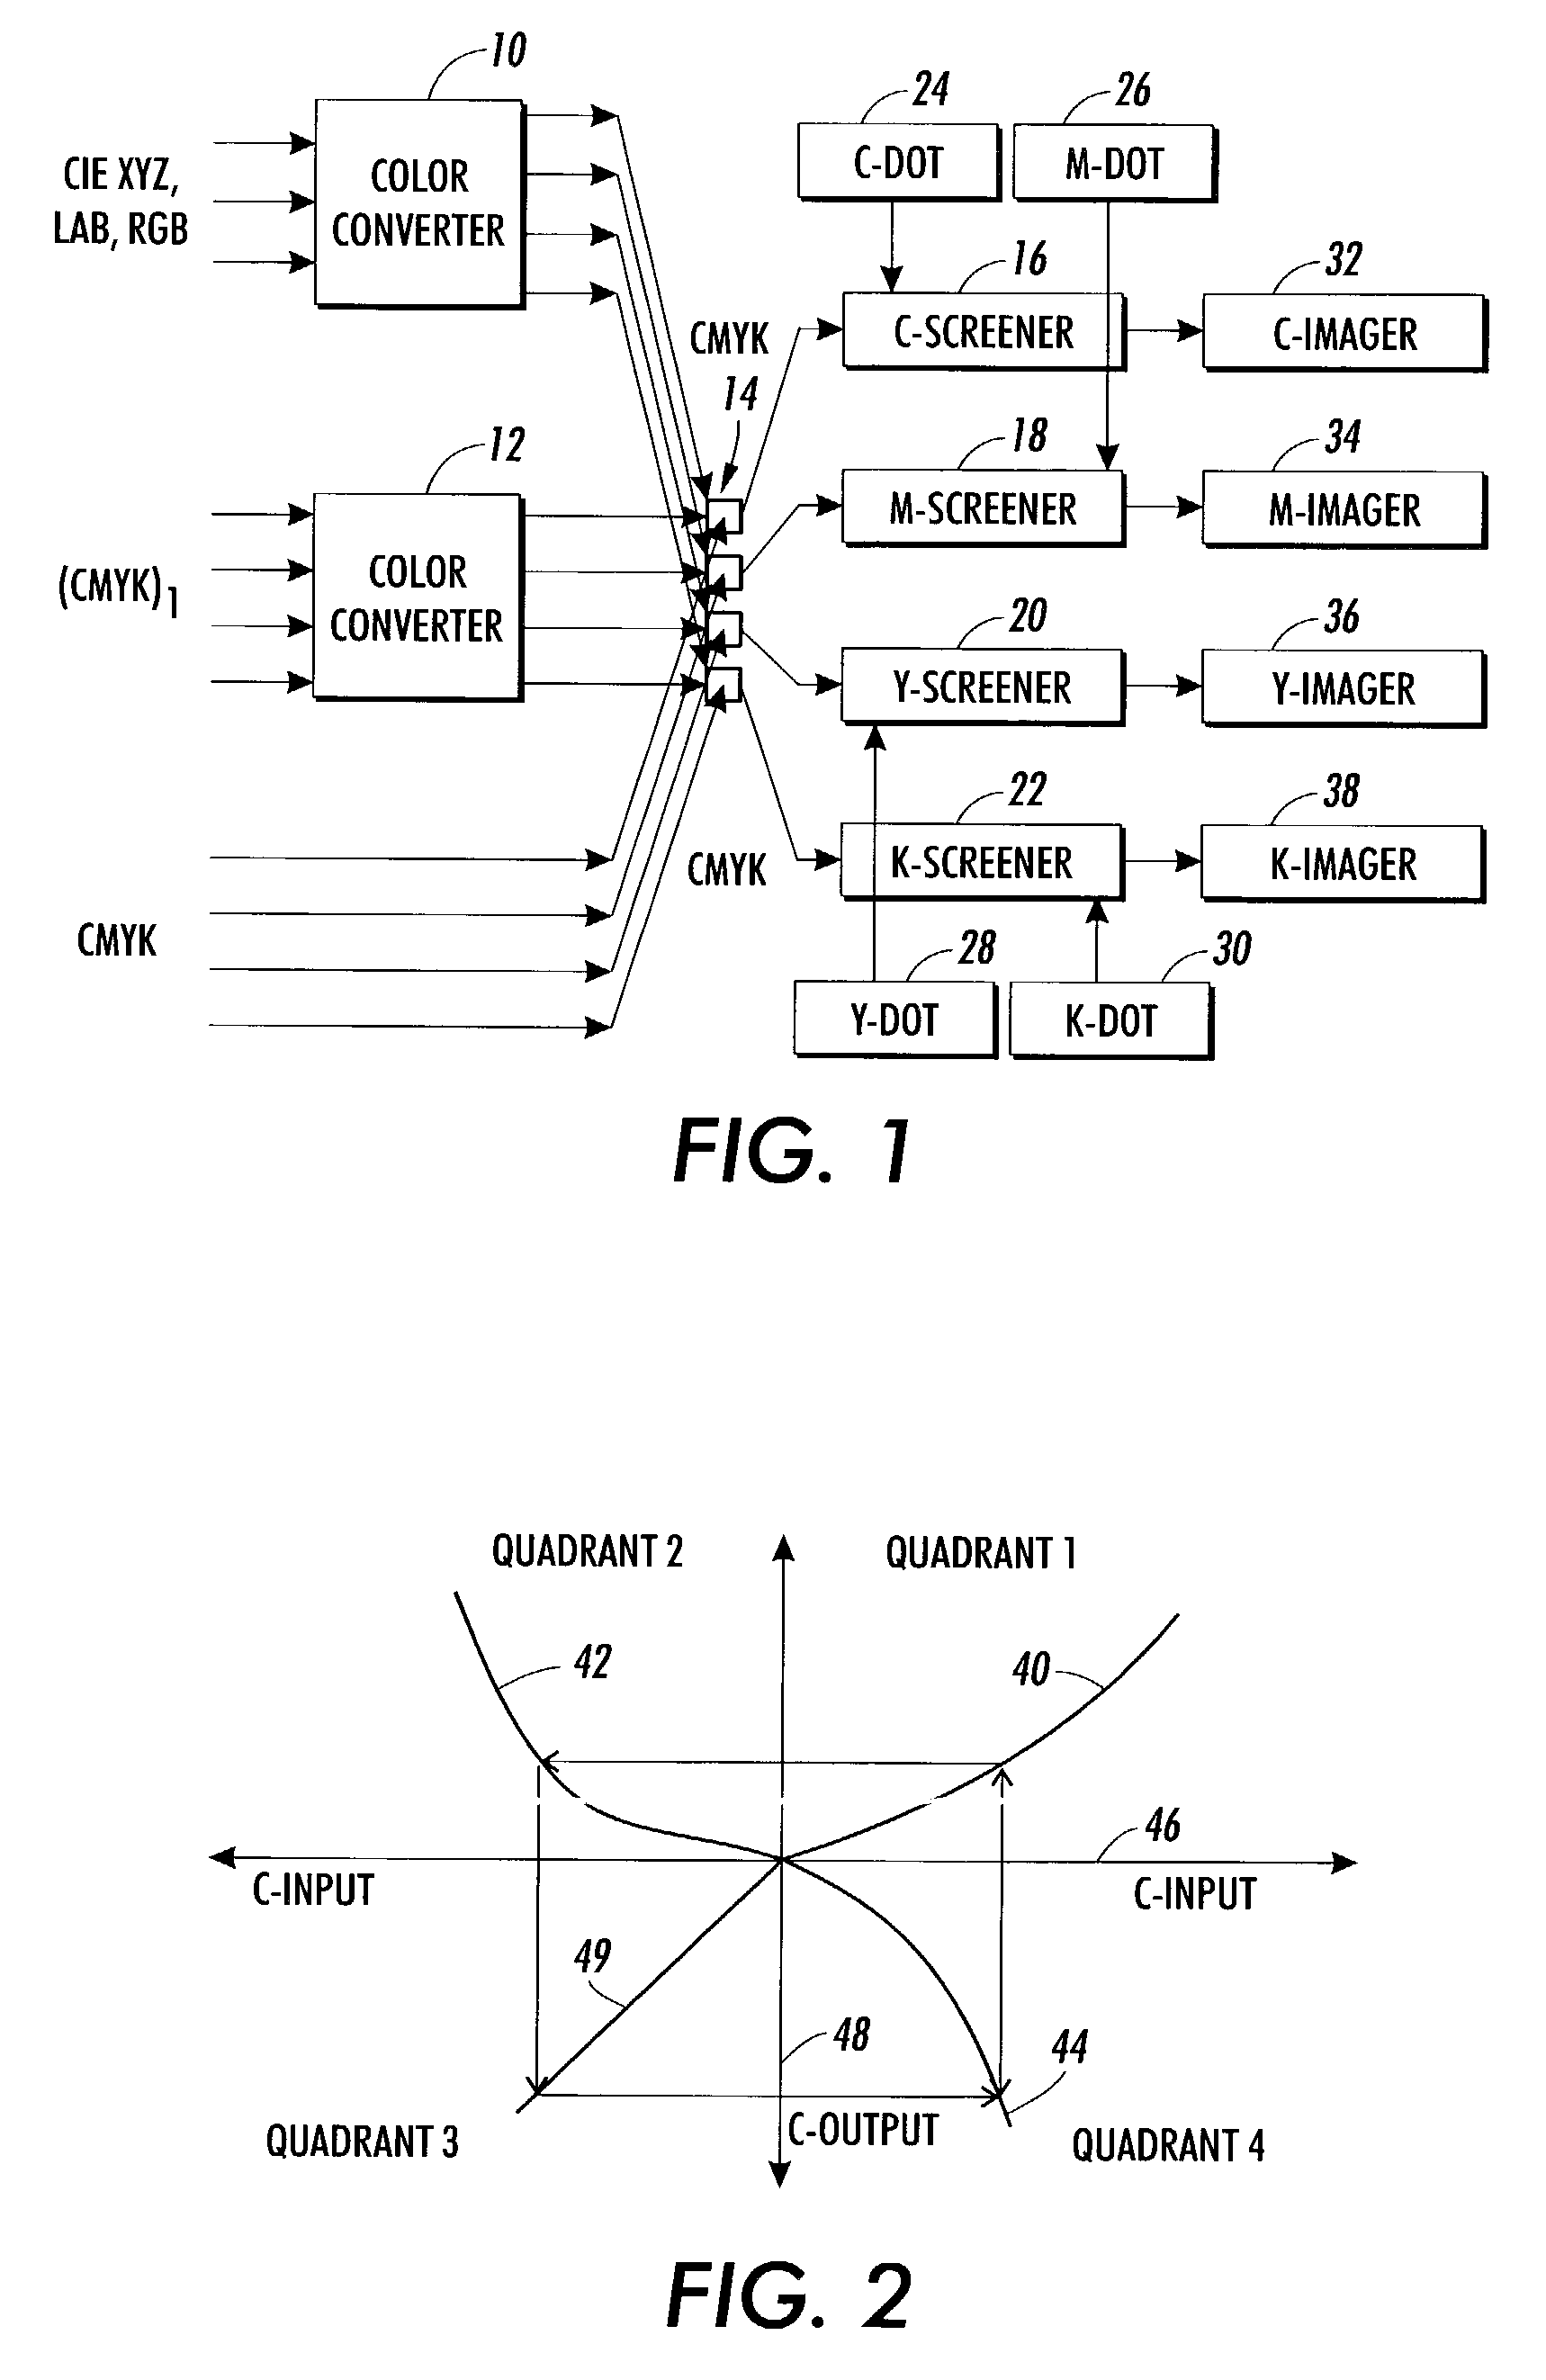 Iterative printer control and color balancing system and method using a high quantization resolution halftone array to achieve improved image quality with reduced processing overhead